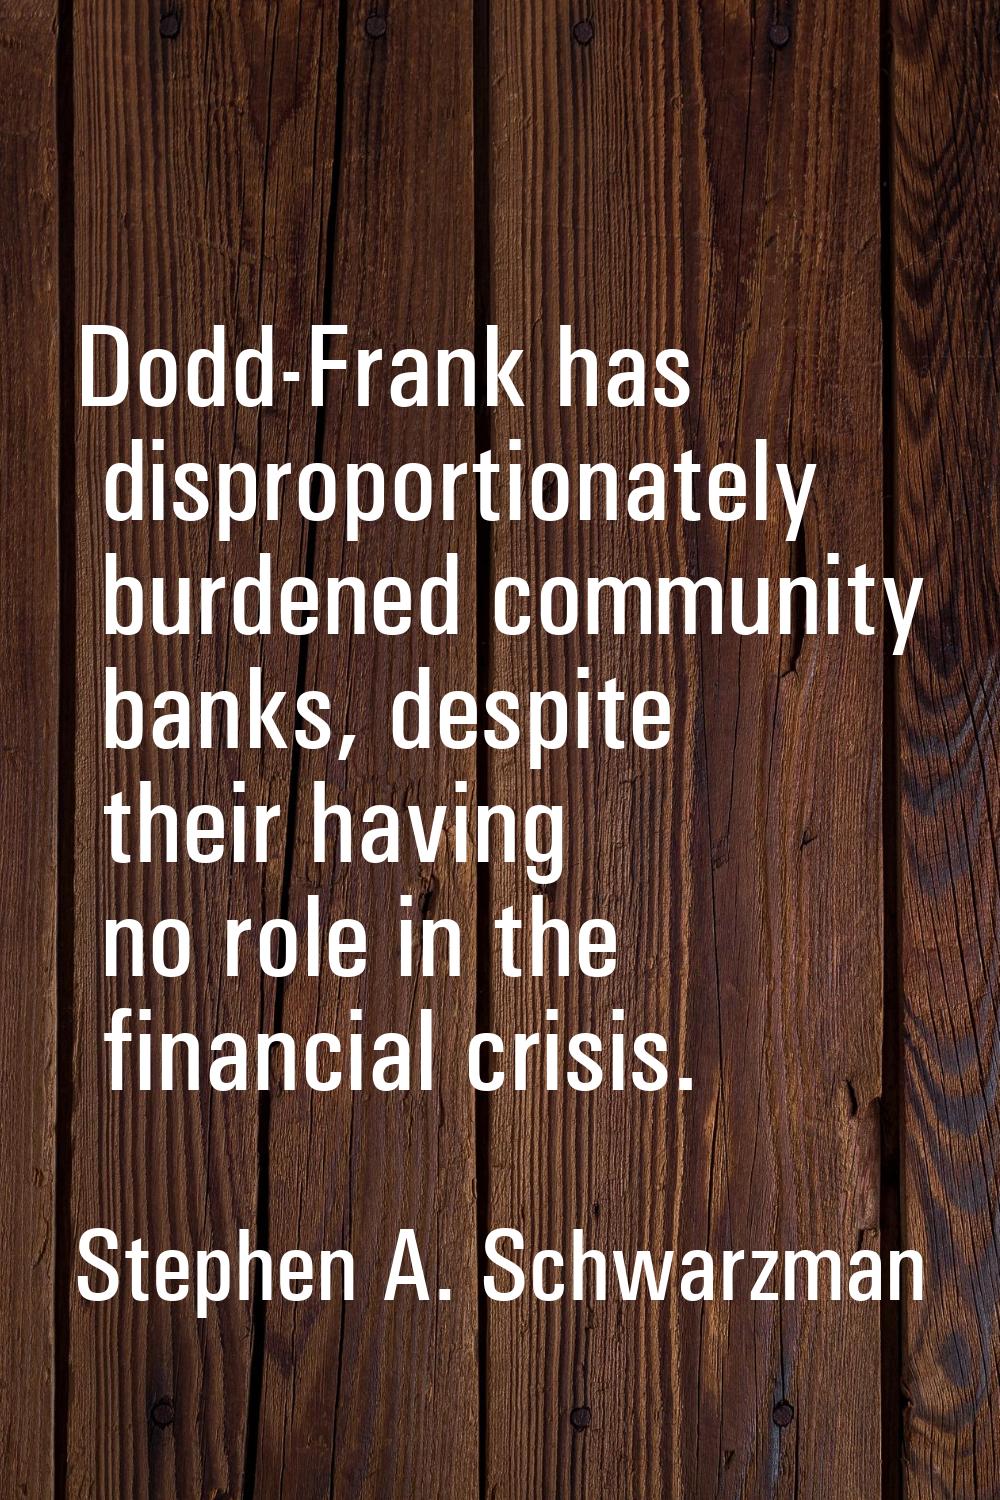 Dodd-Frank has disproportionately burdened community banks, despite their having no role in the fin